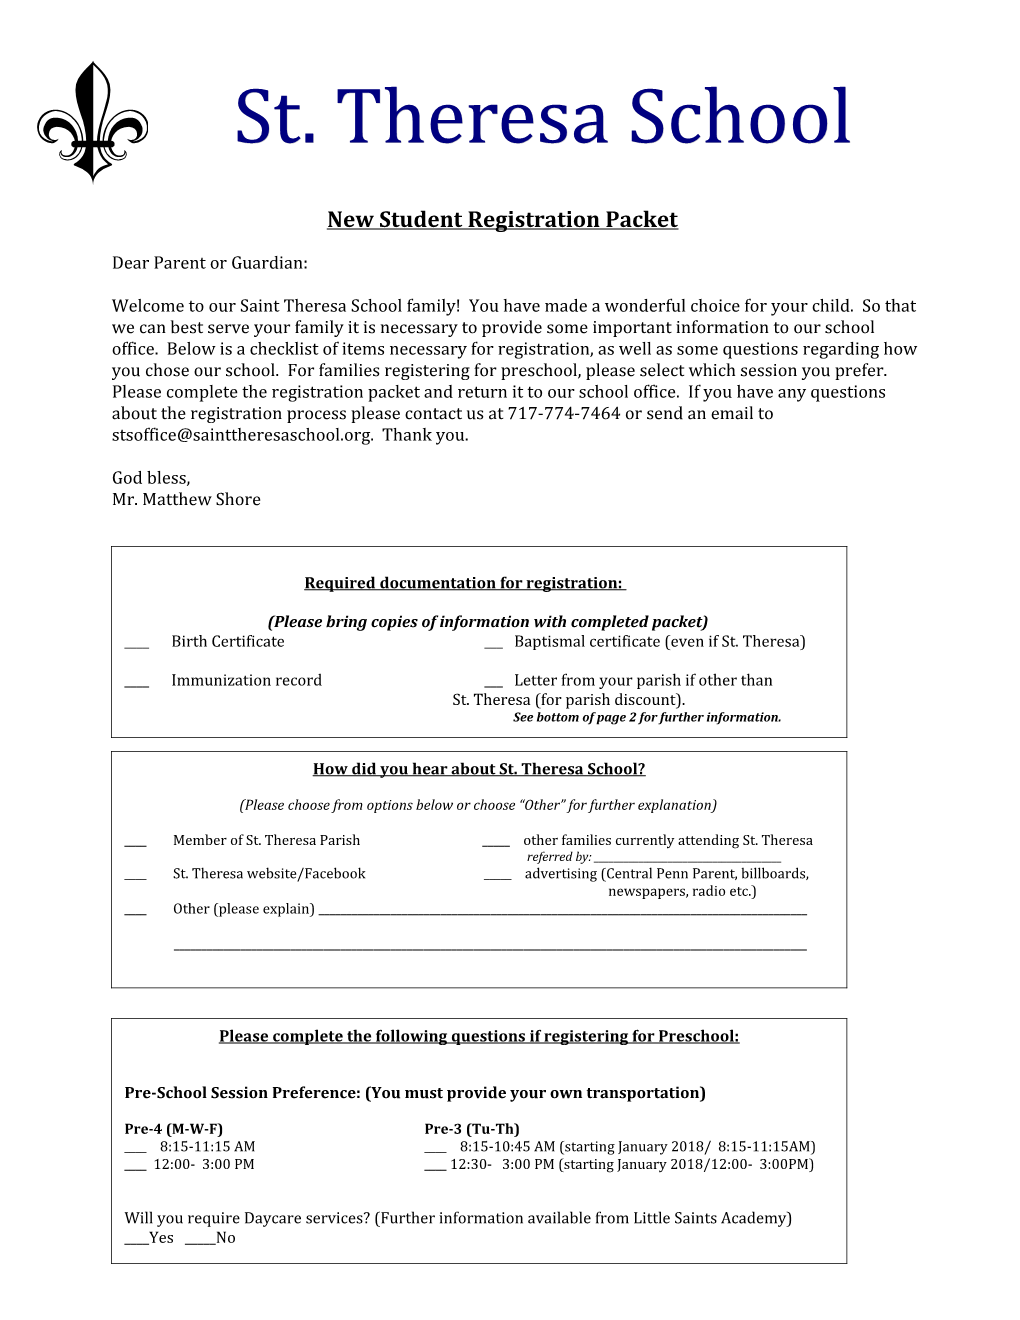 New Student Registration Packet